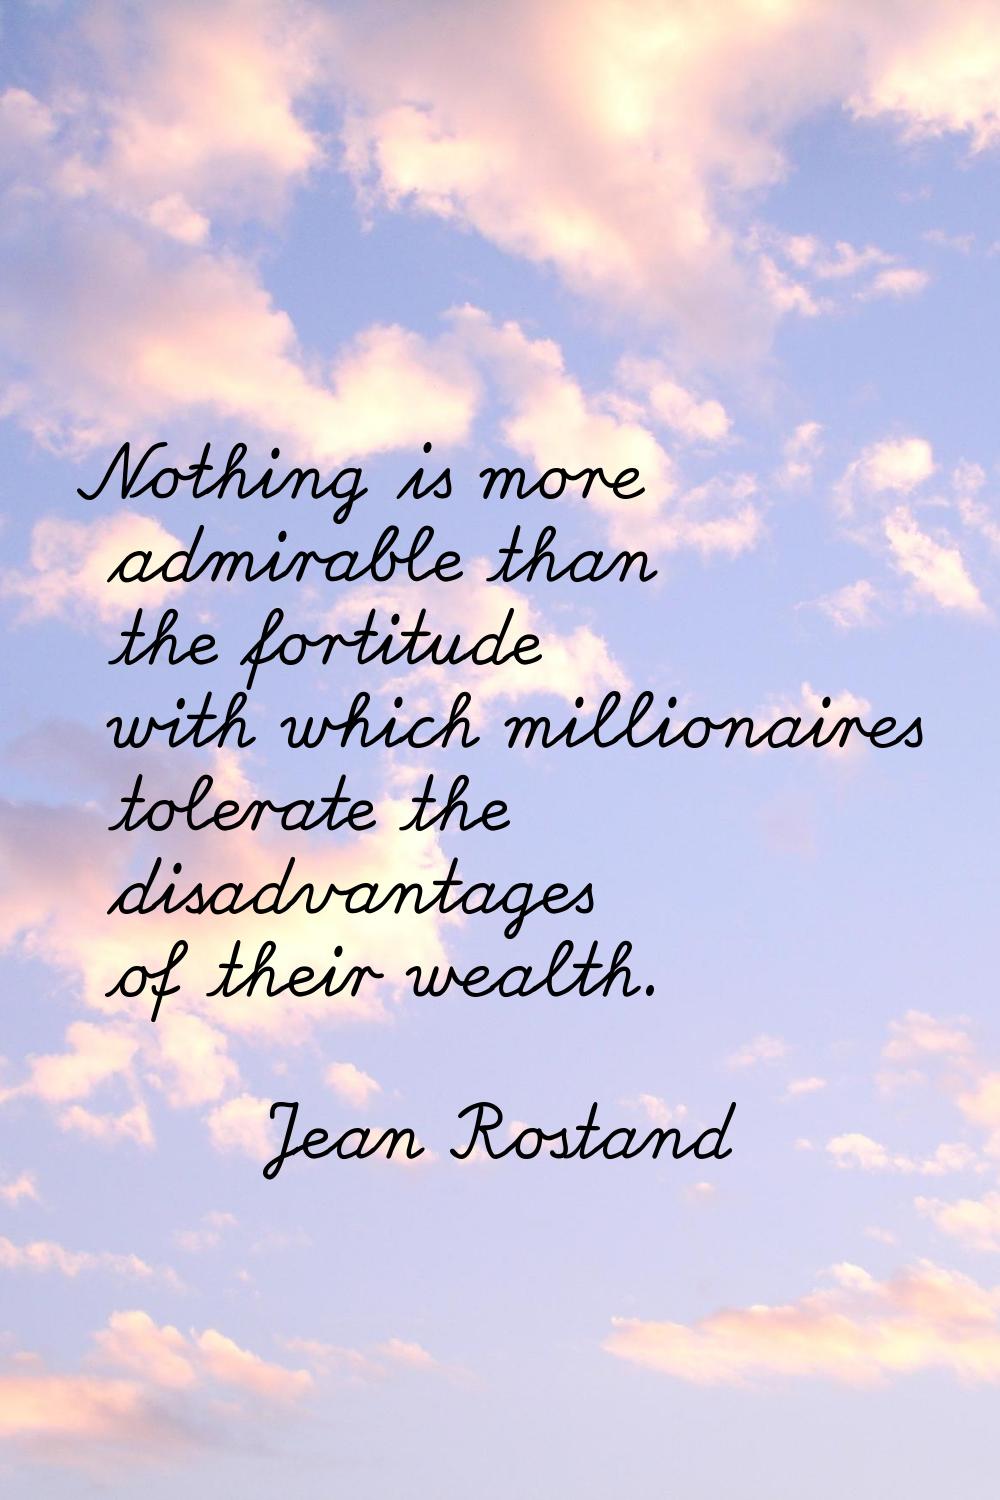 Nothing is more admirable than the fortitude with which millionaires tolerate the disadvantages of 